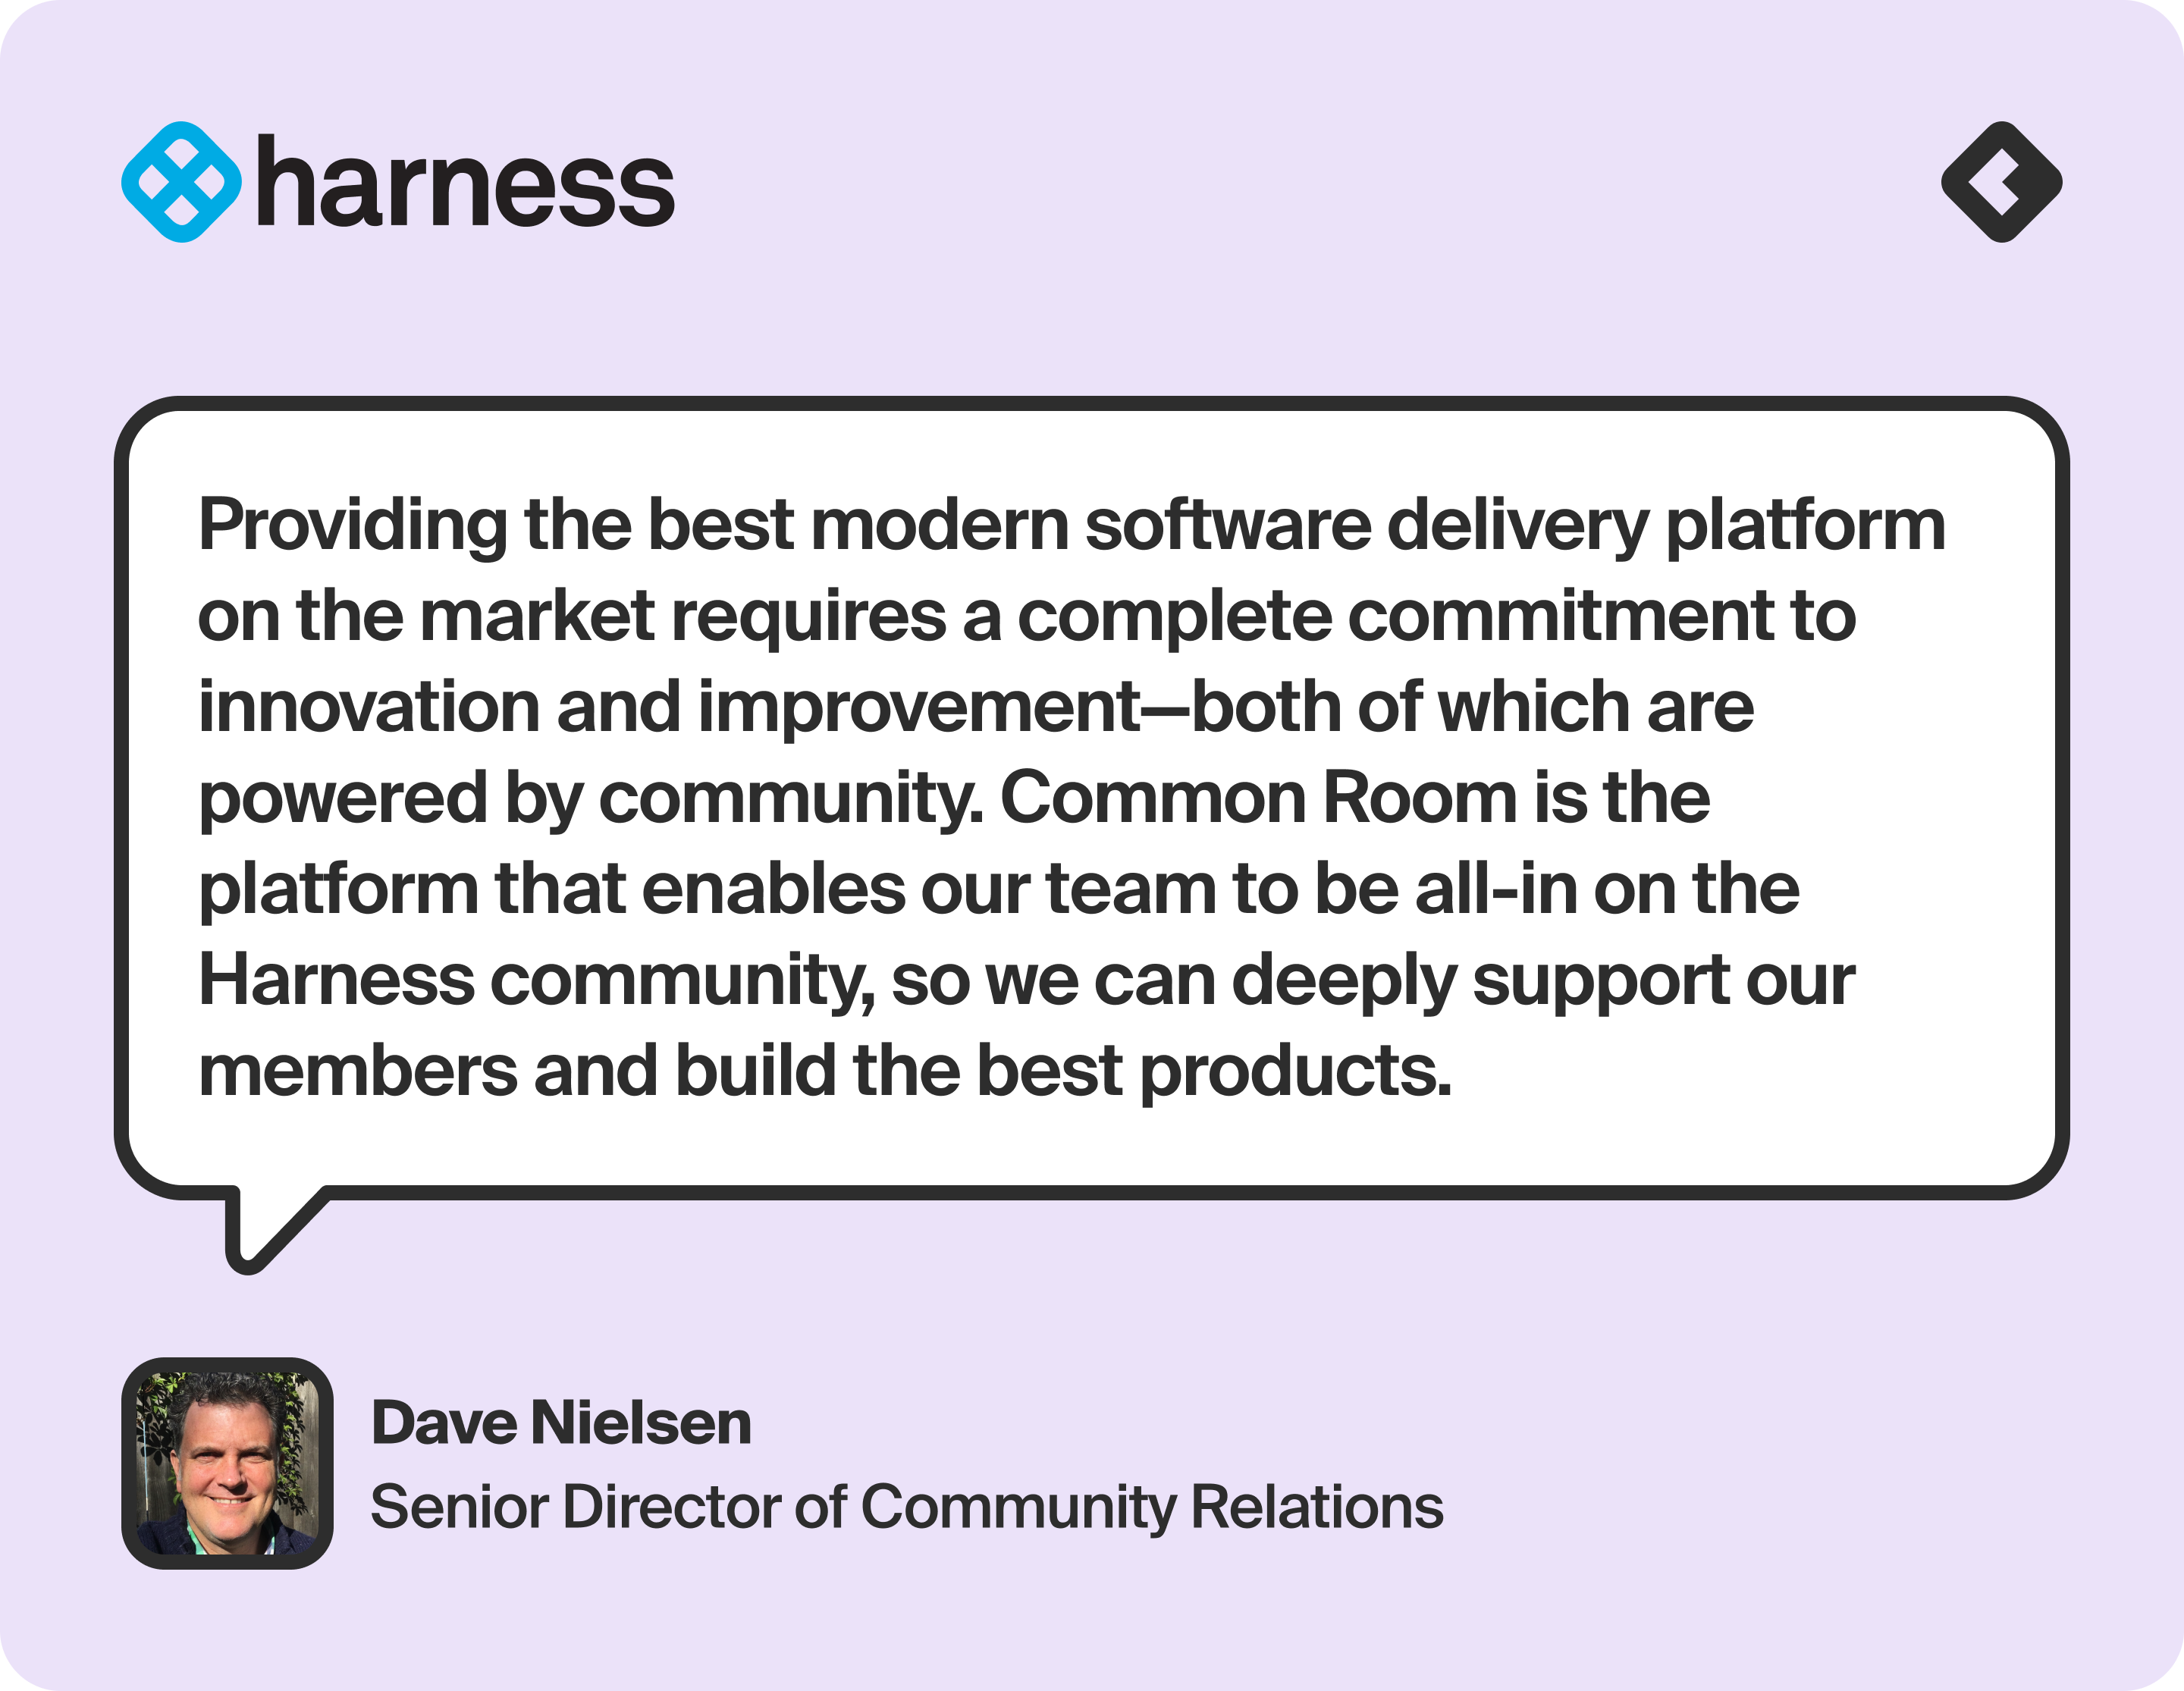 “Providing the best modern software delivery platform on the market requires a complete commitment to innovation and improvement—both of which are powered by community. Common Room is the platform that enables our team to be all-in on the Harness community, so we can deeply support our members and build the best products.” — Dave Nielsen, Senior Director, Community Relations